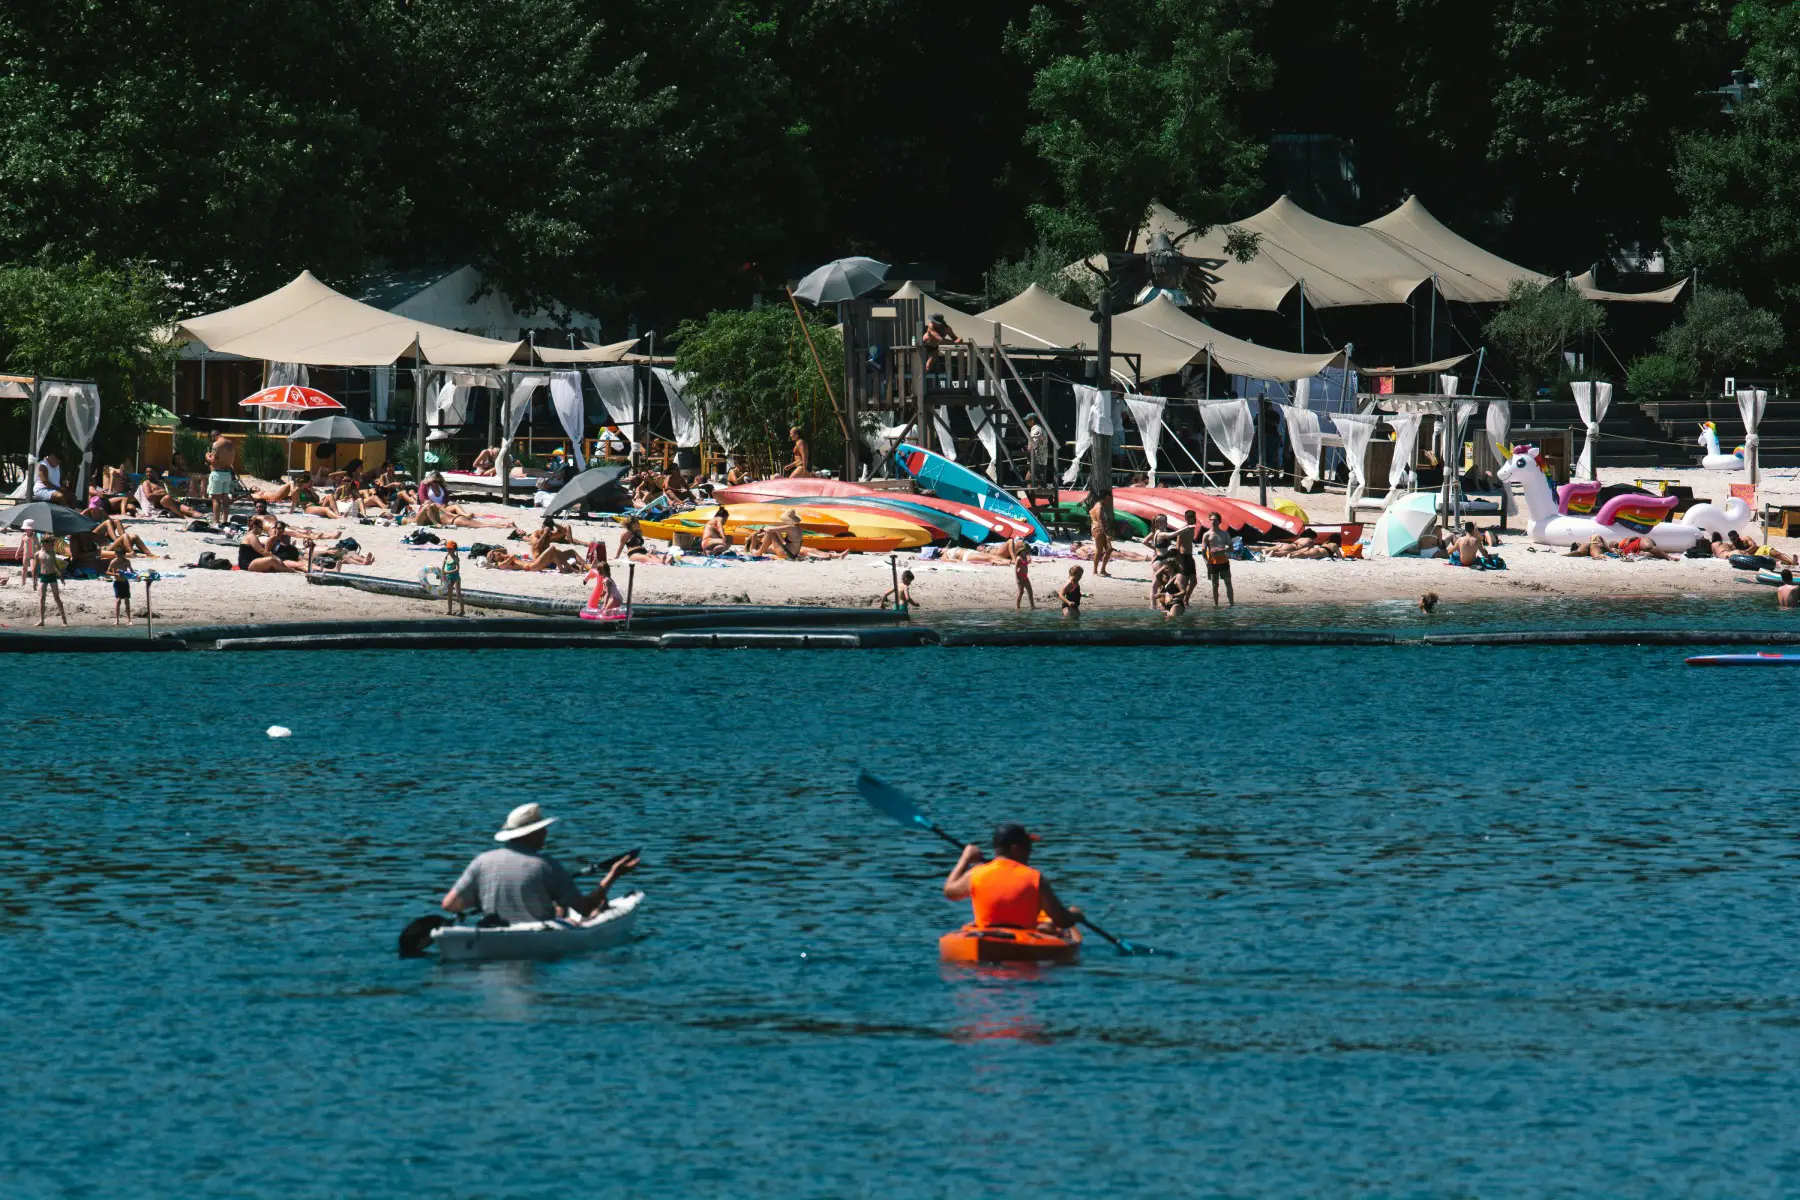 people relaxing in the sun at Fühlinger See beach on a summer day in Cologne, with two people kayaking in the foreground